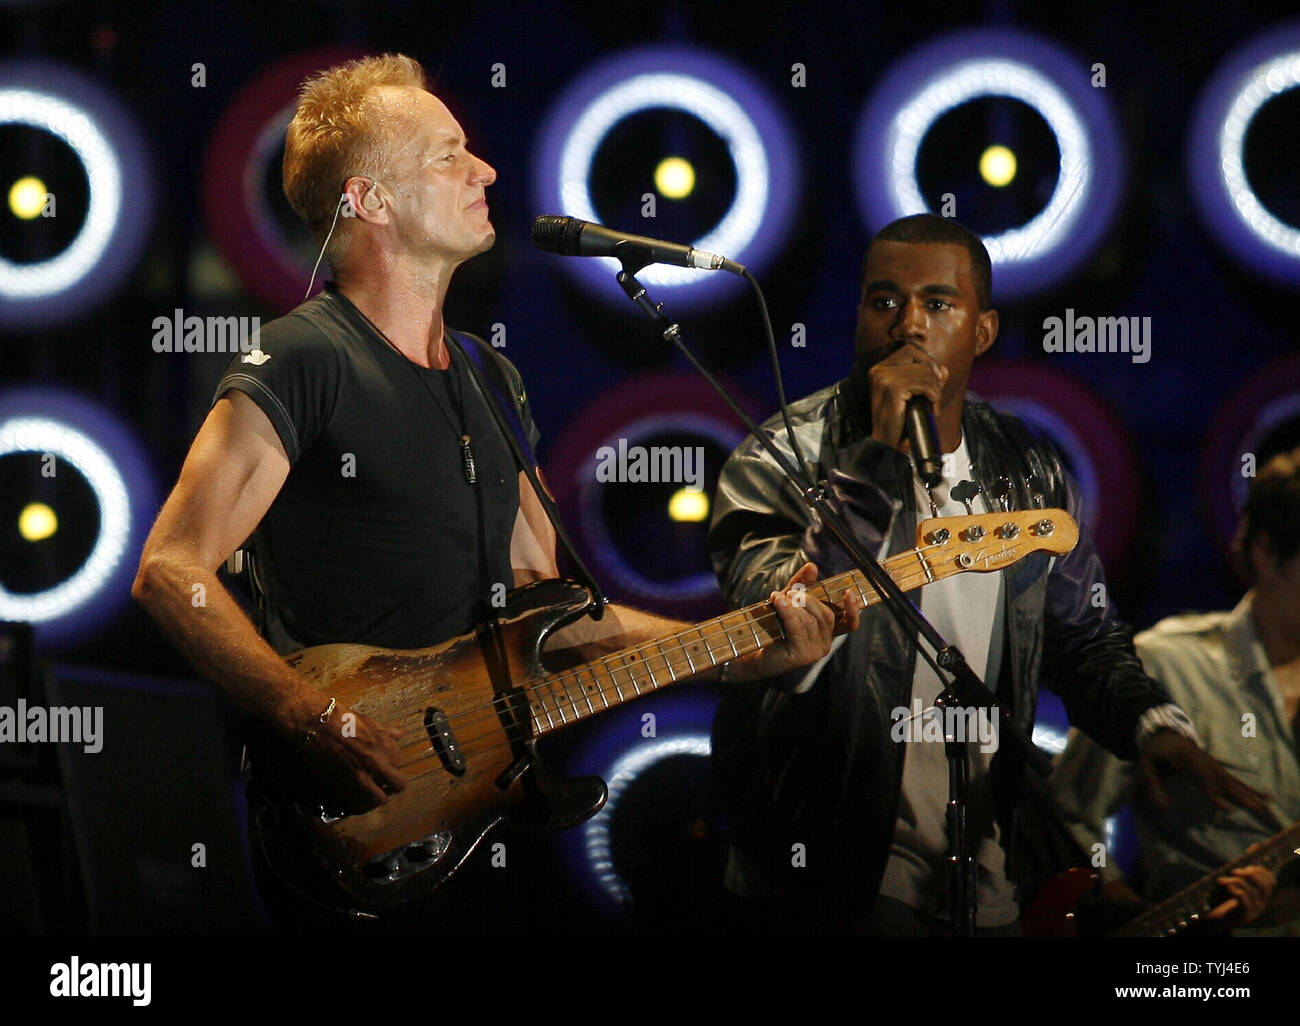 L-R) Sting and Kanye West perform with The Police during Live Earth, the  concerts for a climate in crisis, at Giants Stadium in East Rutherford, New  Jersey on July 7, 2007. (UPI